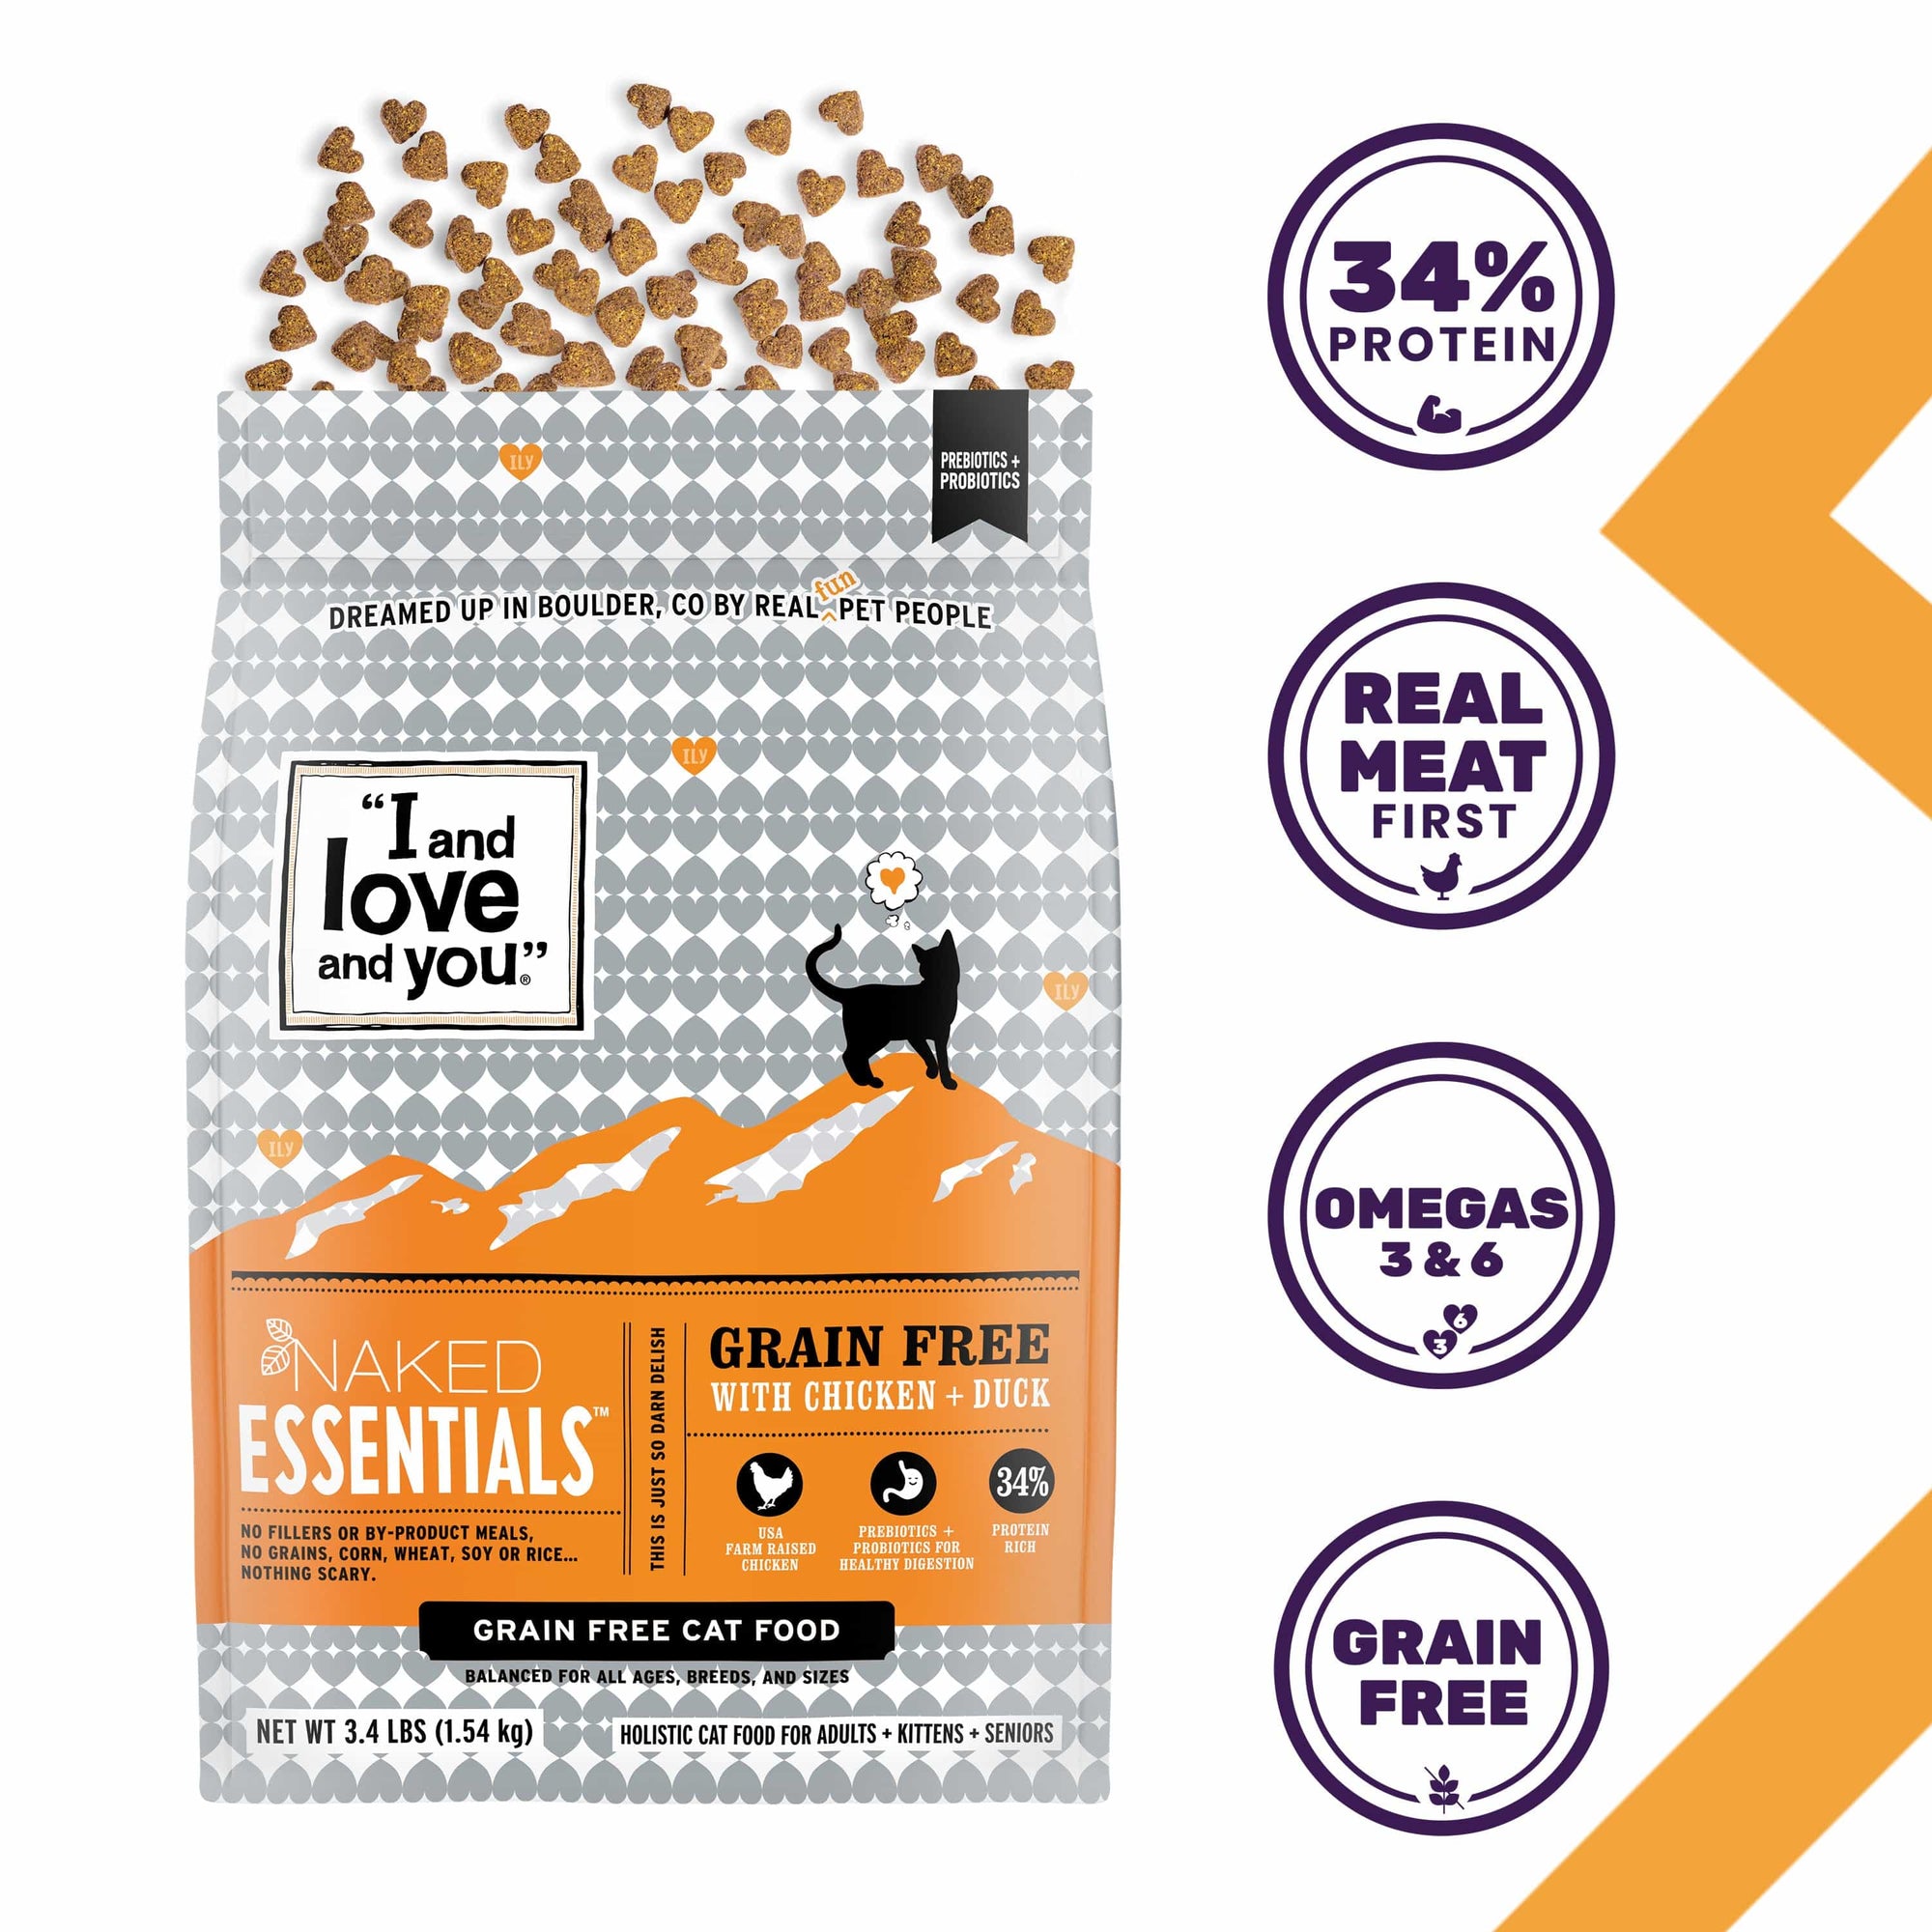 A bag of cat food with a label of Naked Essentials - Chicken + Duck.